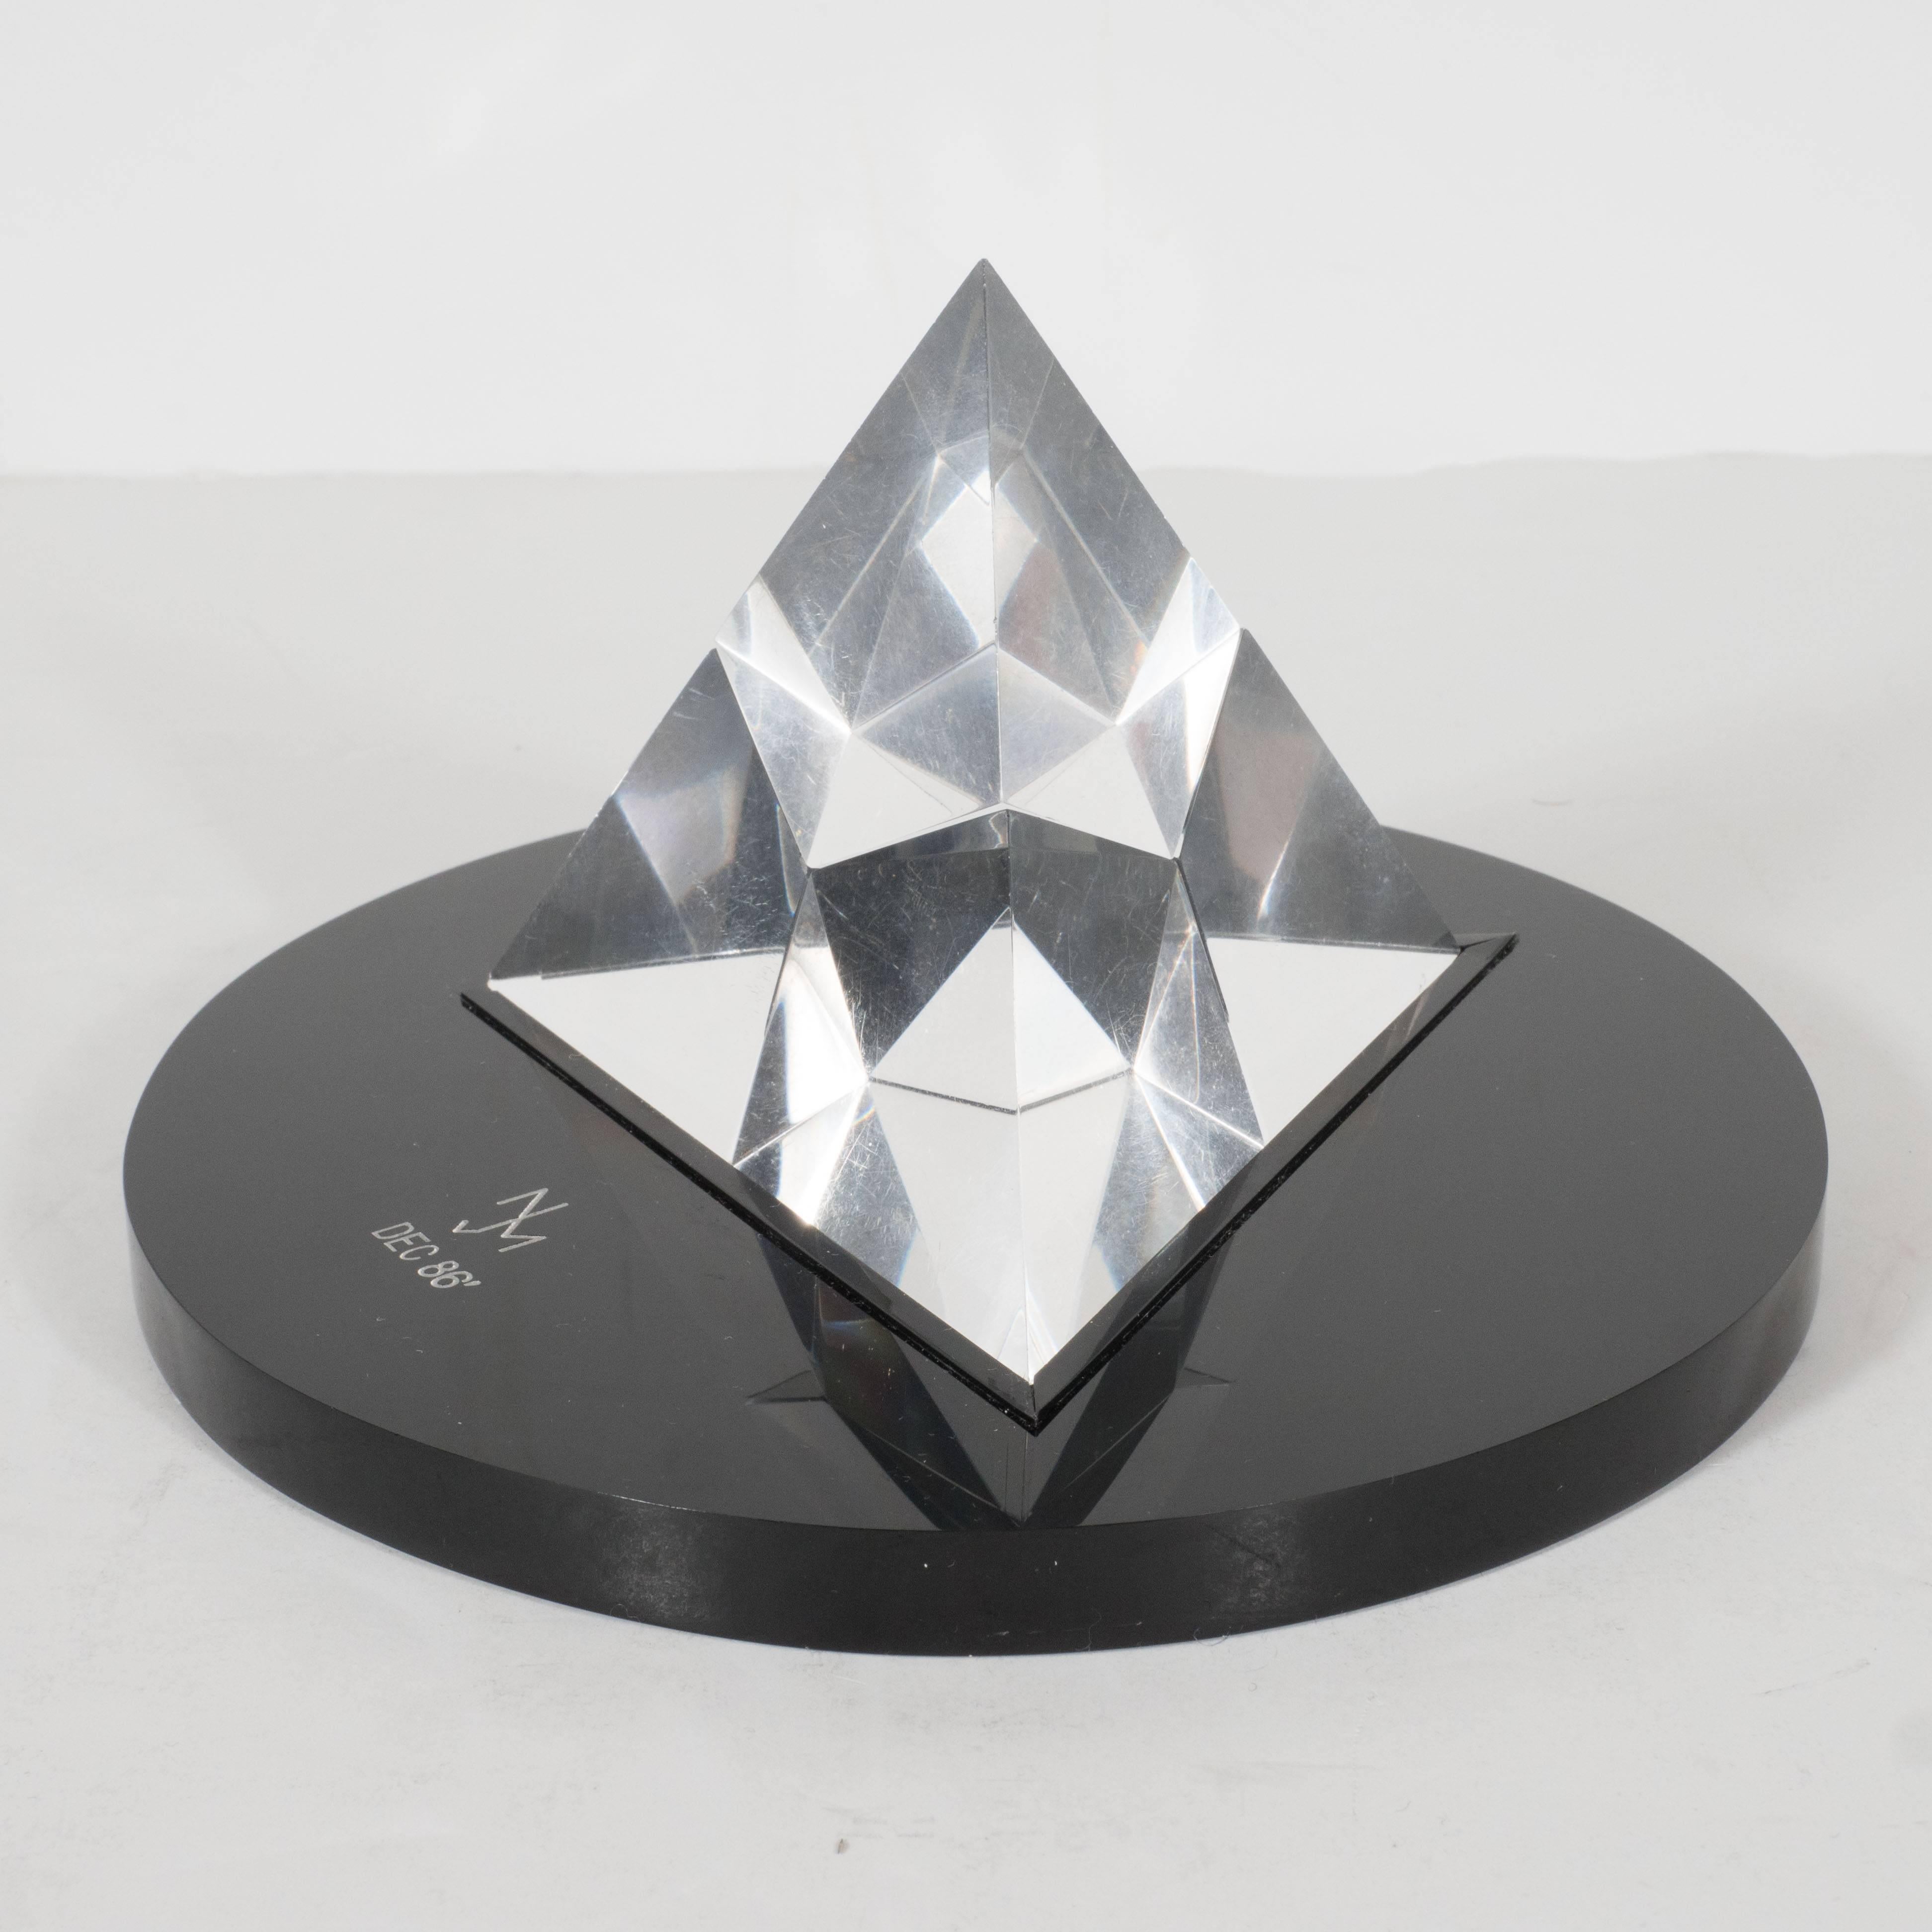 American Modernist and Luminous Clear Lucite Prism Pyramid Sculpture